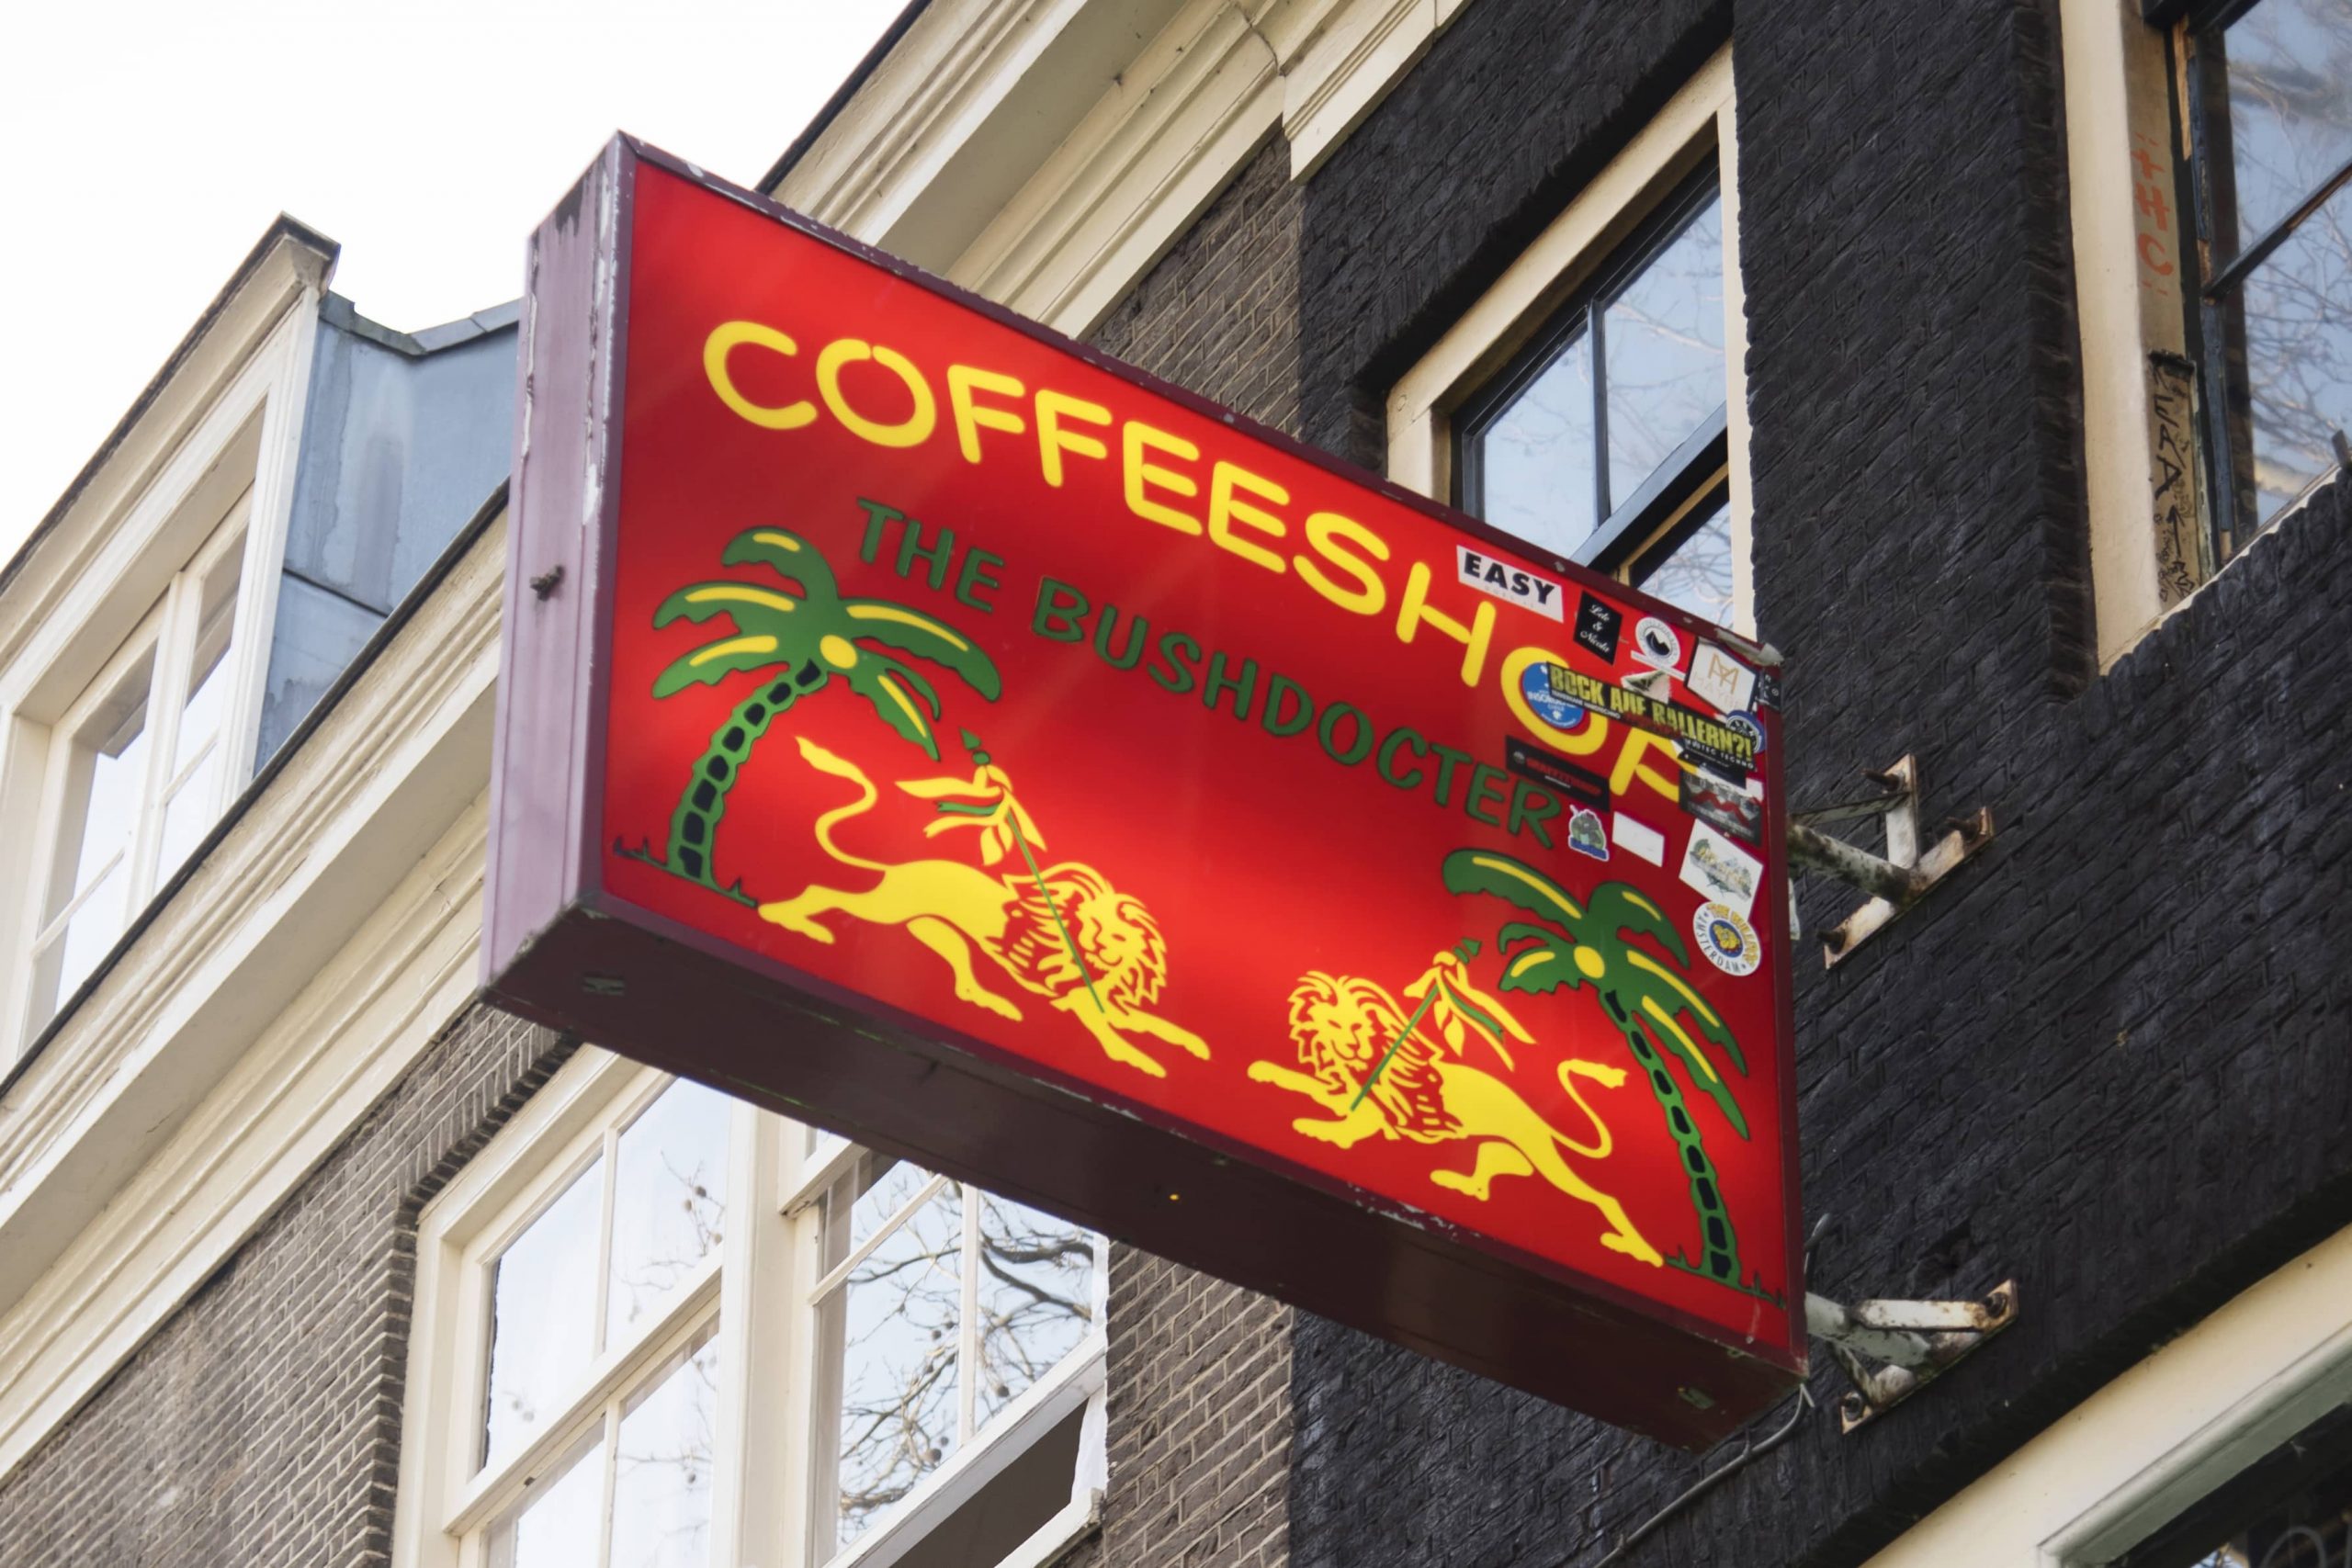 The Bushdocter Coffeeshop Amsterdam - Weed Recommend